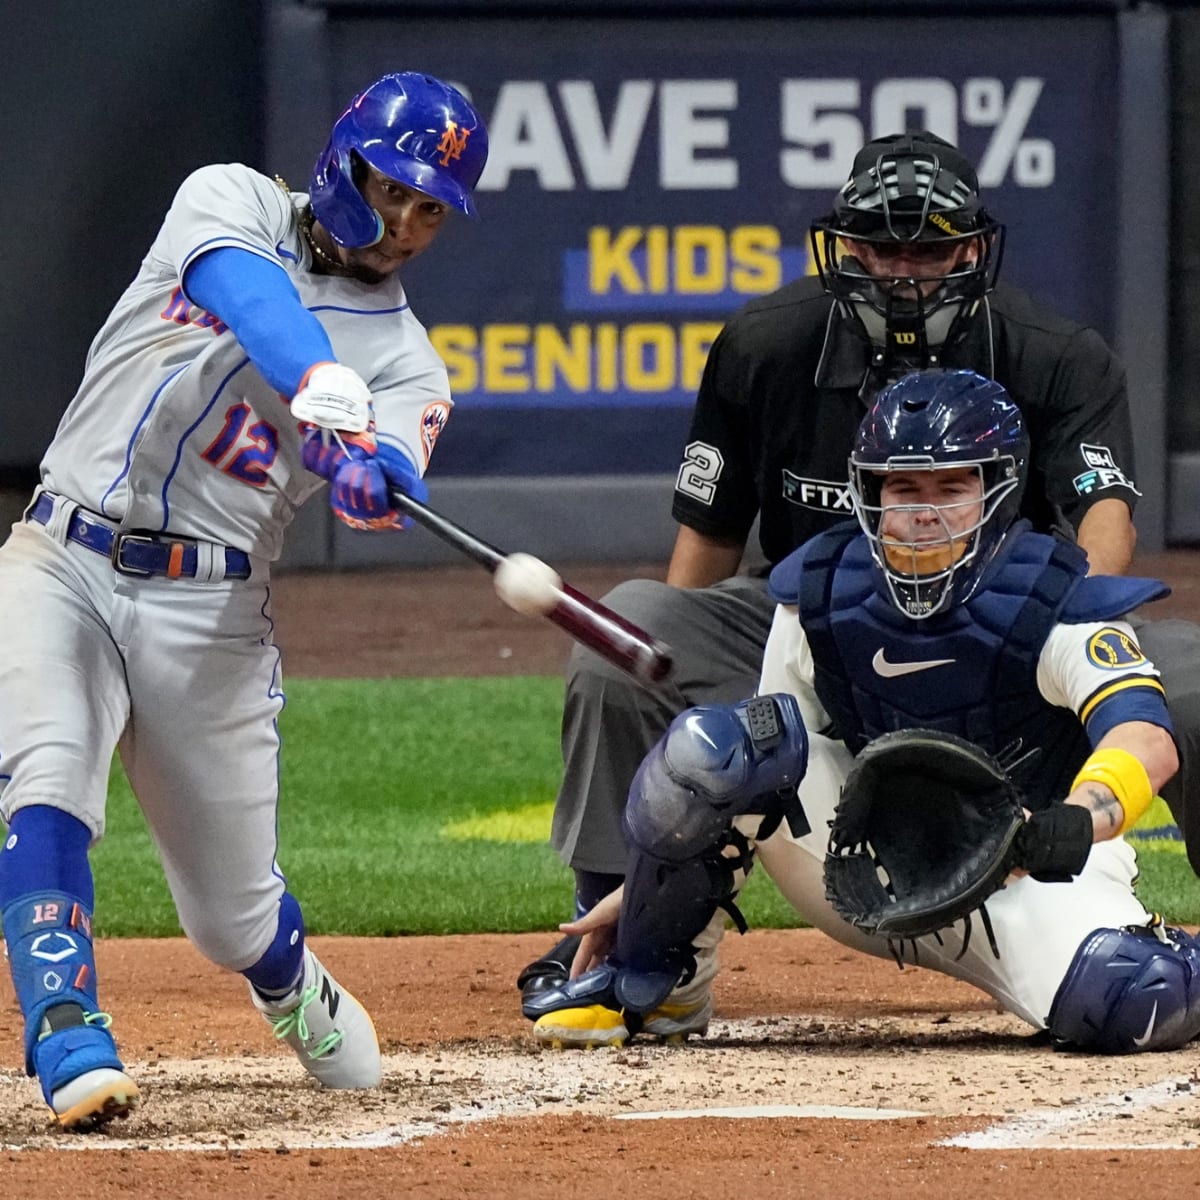 New York Mets clinch playoff berth. Can they win NL East?